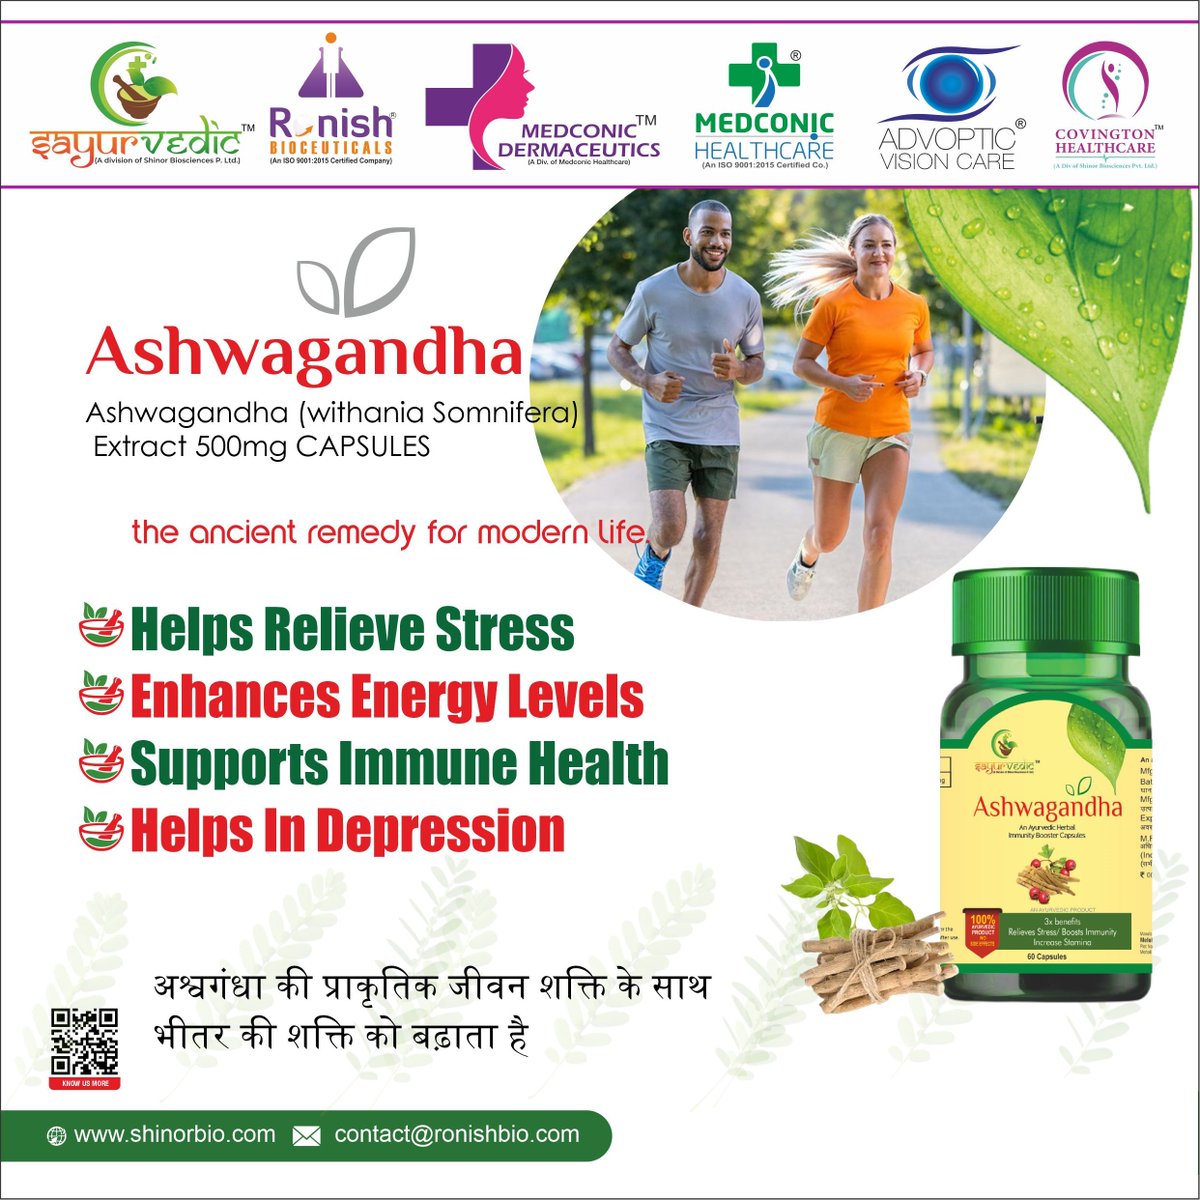 🌿 Elevate Your Wellness Routine with Sayurvedic's ASHWAGANDHA Extract 500mg! 🌿

Unleash the Power of Nature with Sayurvedic's premium ASHWAGANDHA supplement! 🚀

#Sayurvedic #Ashwagandha #NaturalHealth #WellnessJourney #HerbalRemedies #HolisticHealth #StressRelief